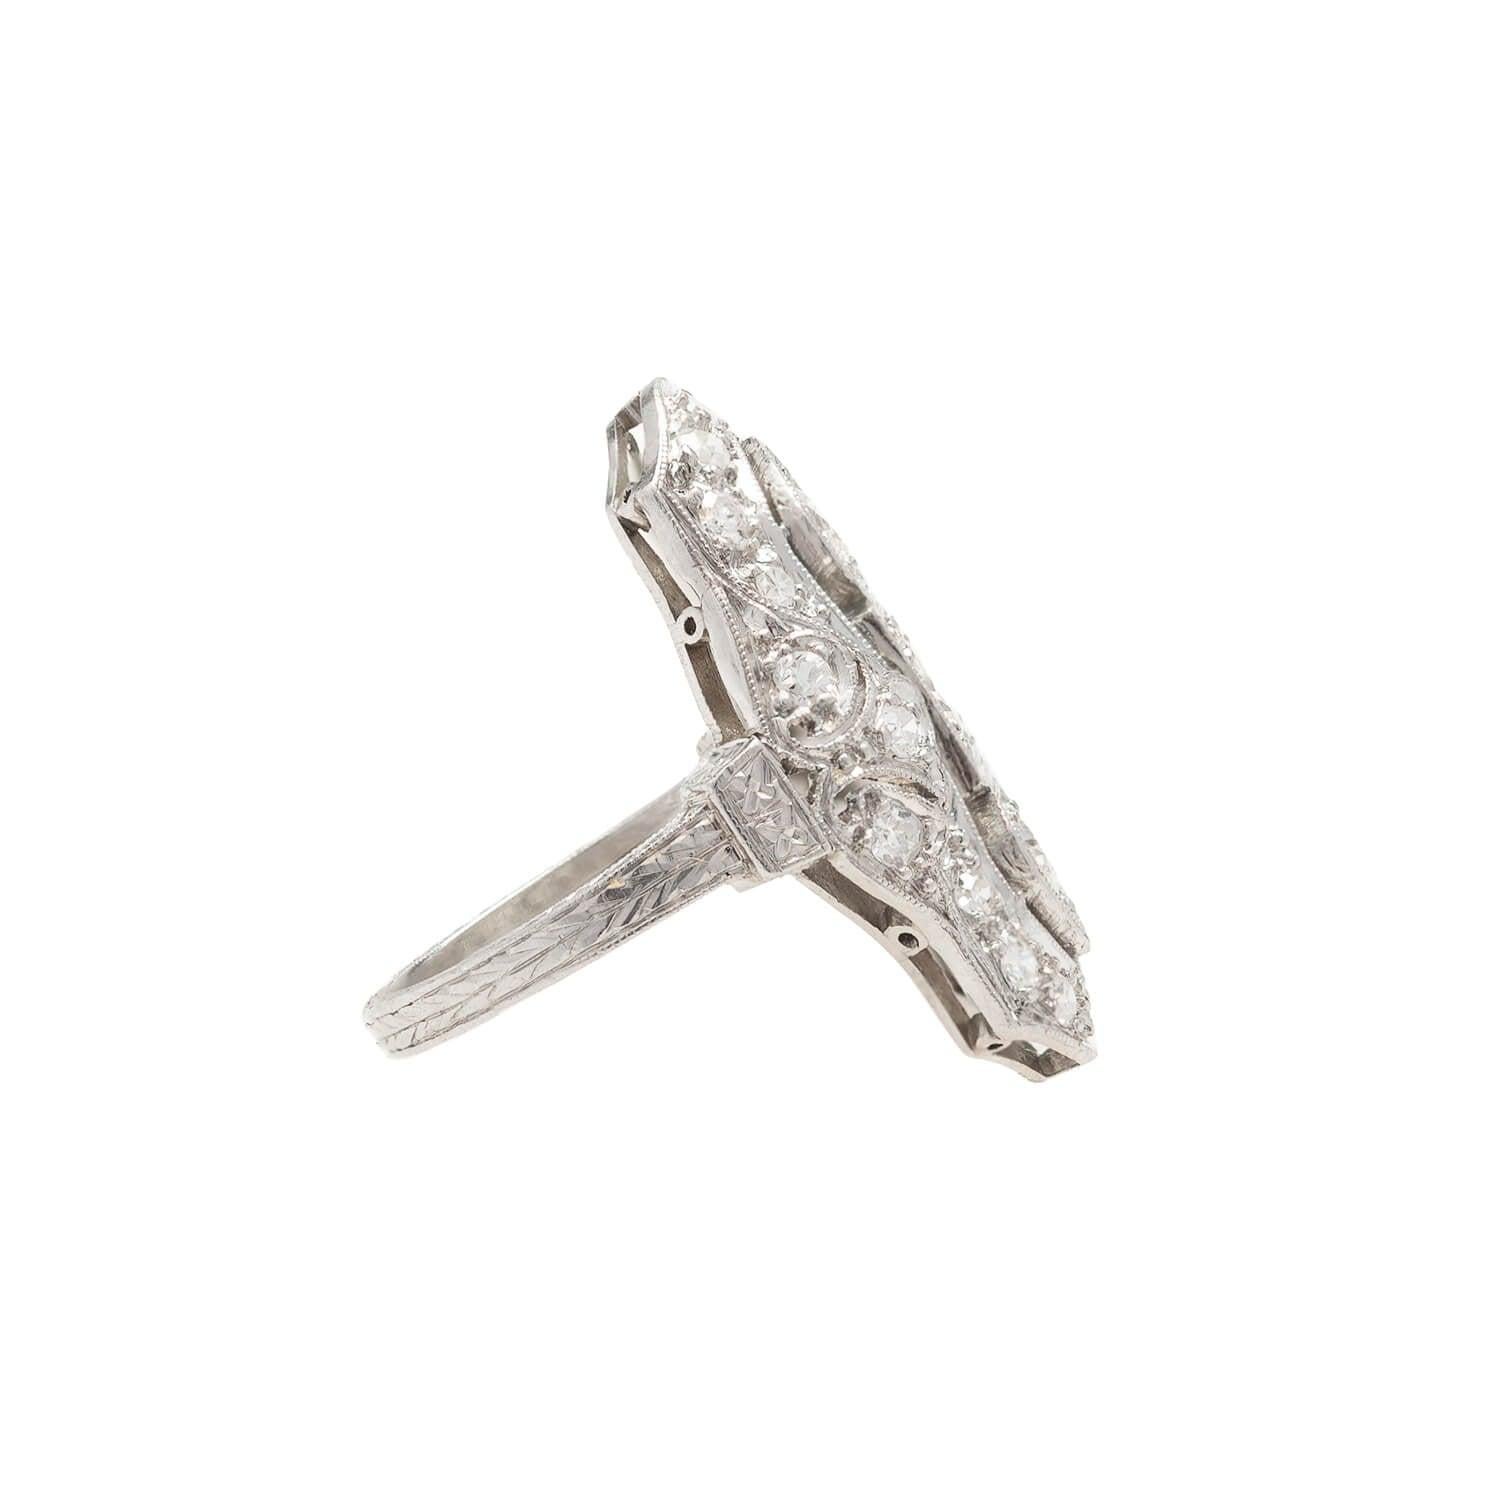 A fantastic diamond ring from the Art Deco (ca1920s) era! Made of platinum, the ring has a stylish and bold navette design decorated with exquisite sparkling Old European cut diamonds. The platinum setting features elegant scrolling filigree and